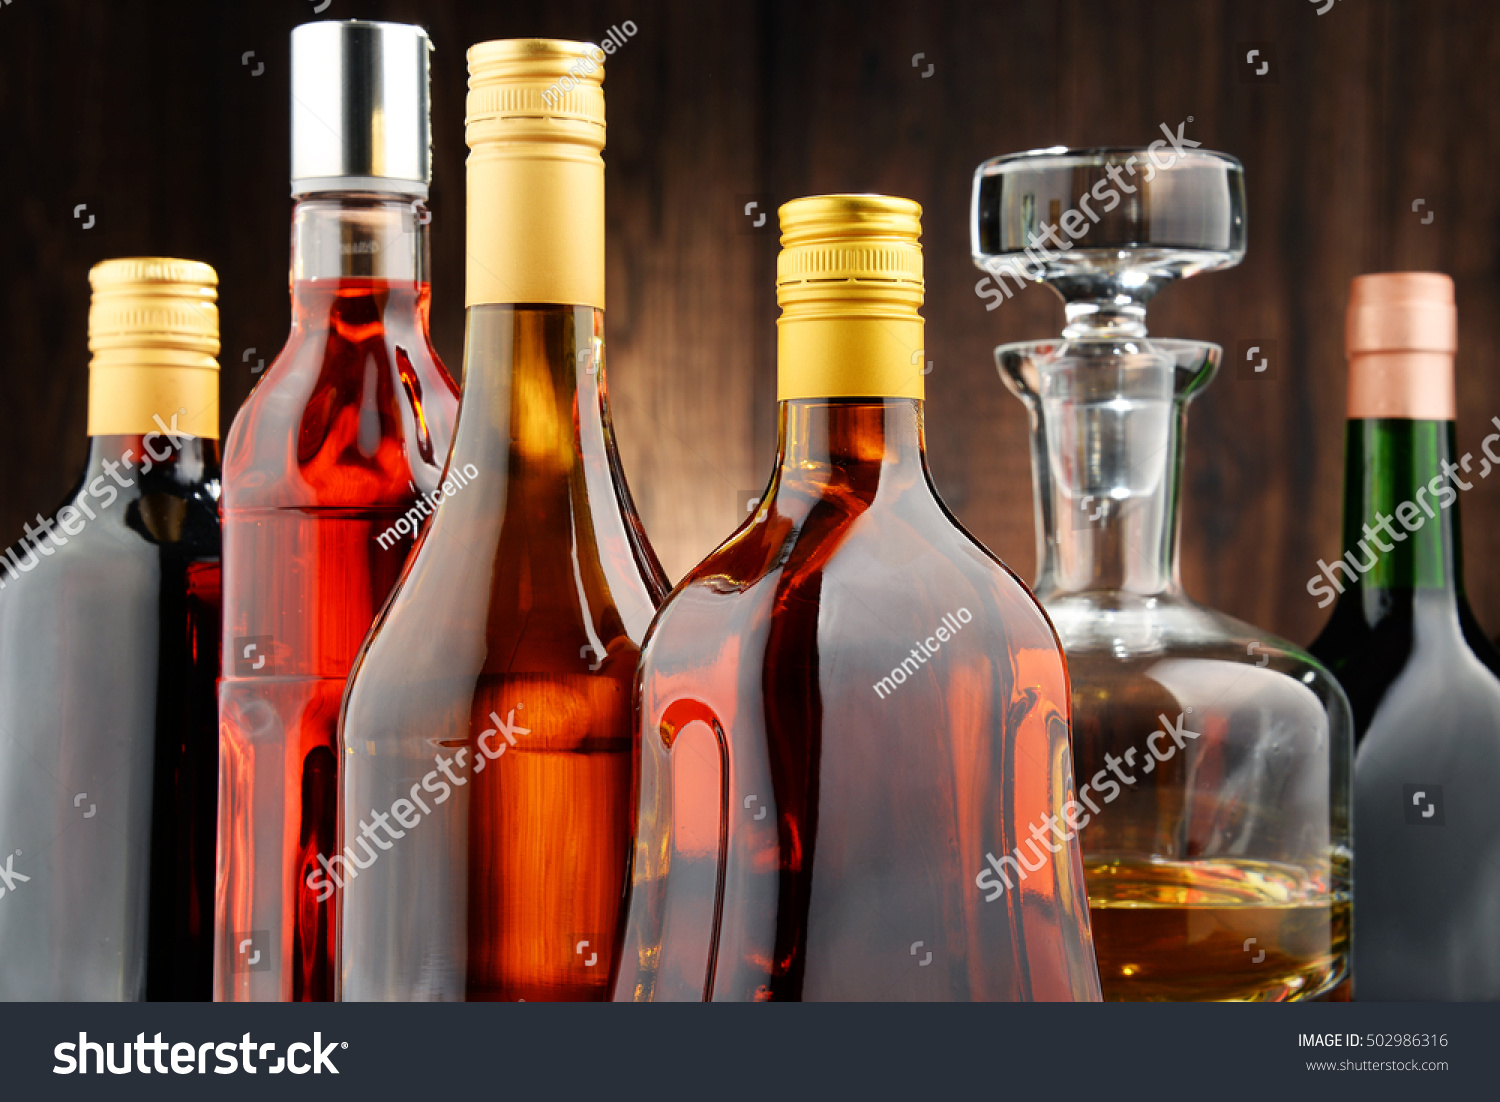 Composition with bottles of assorted alcoholic beverages. #502986316